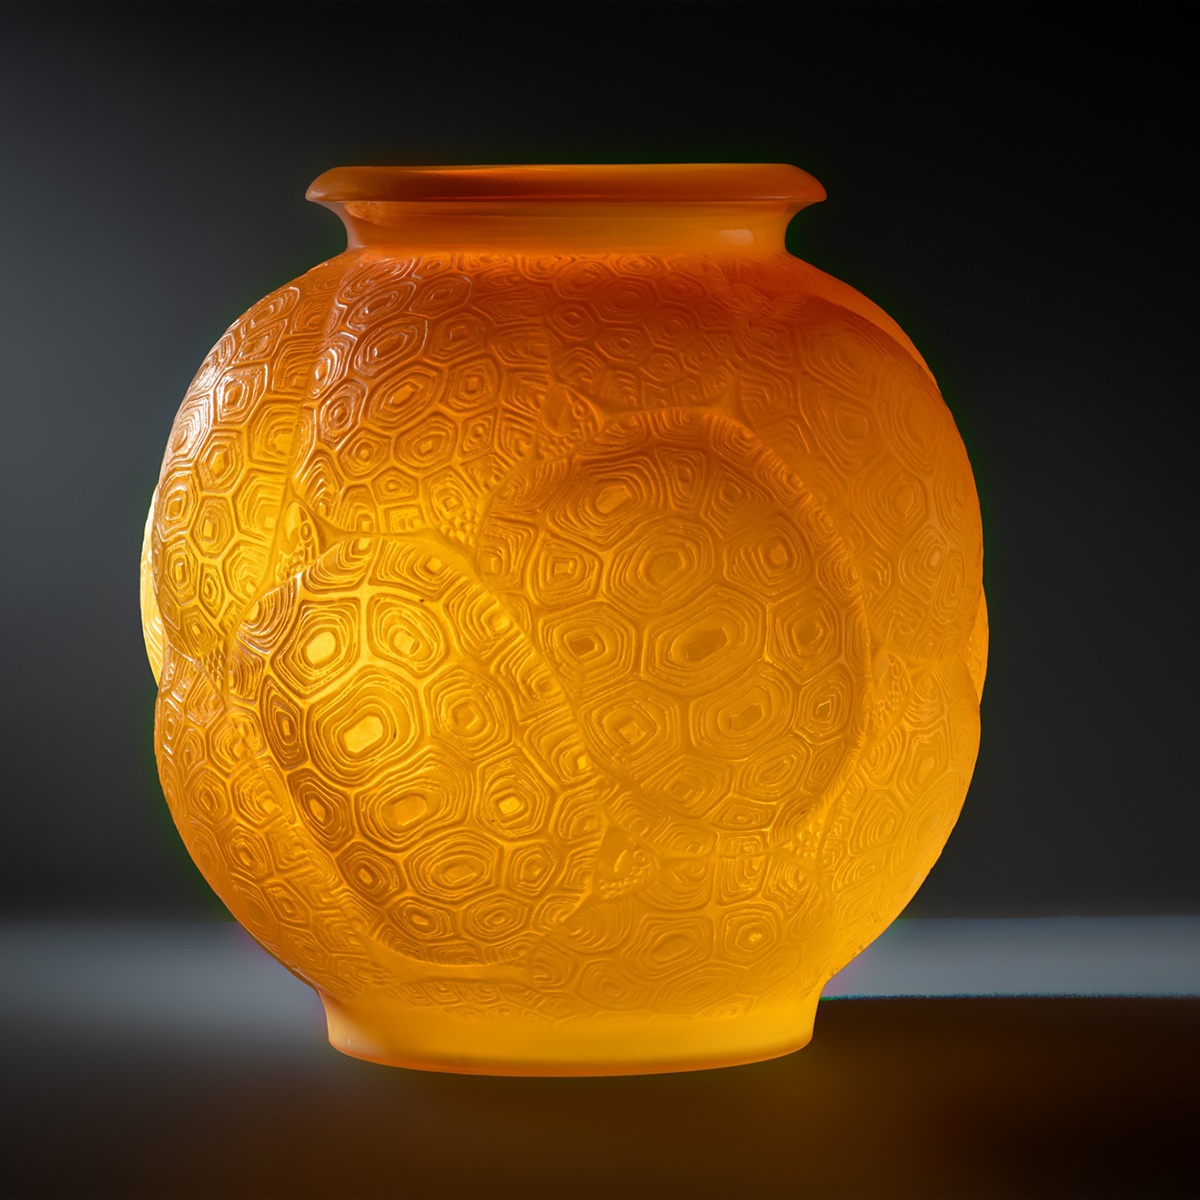 LOT 150 | RENÉ LALIQUE (FRENCH 1860-1945) | TORTUES VASE, NO. 966 | £30,000 - £50,000 + fees